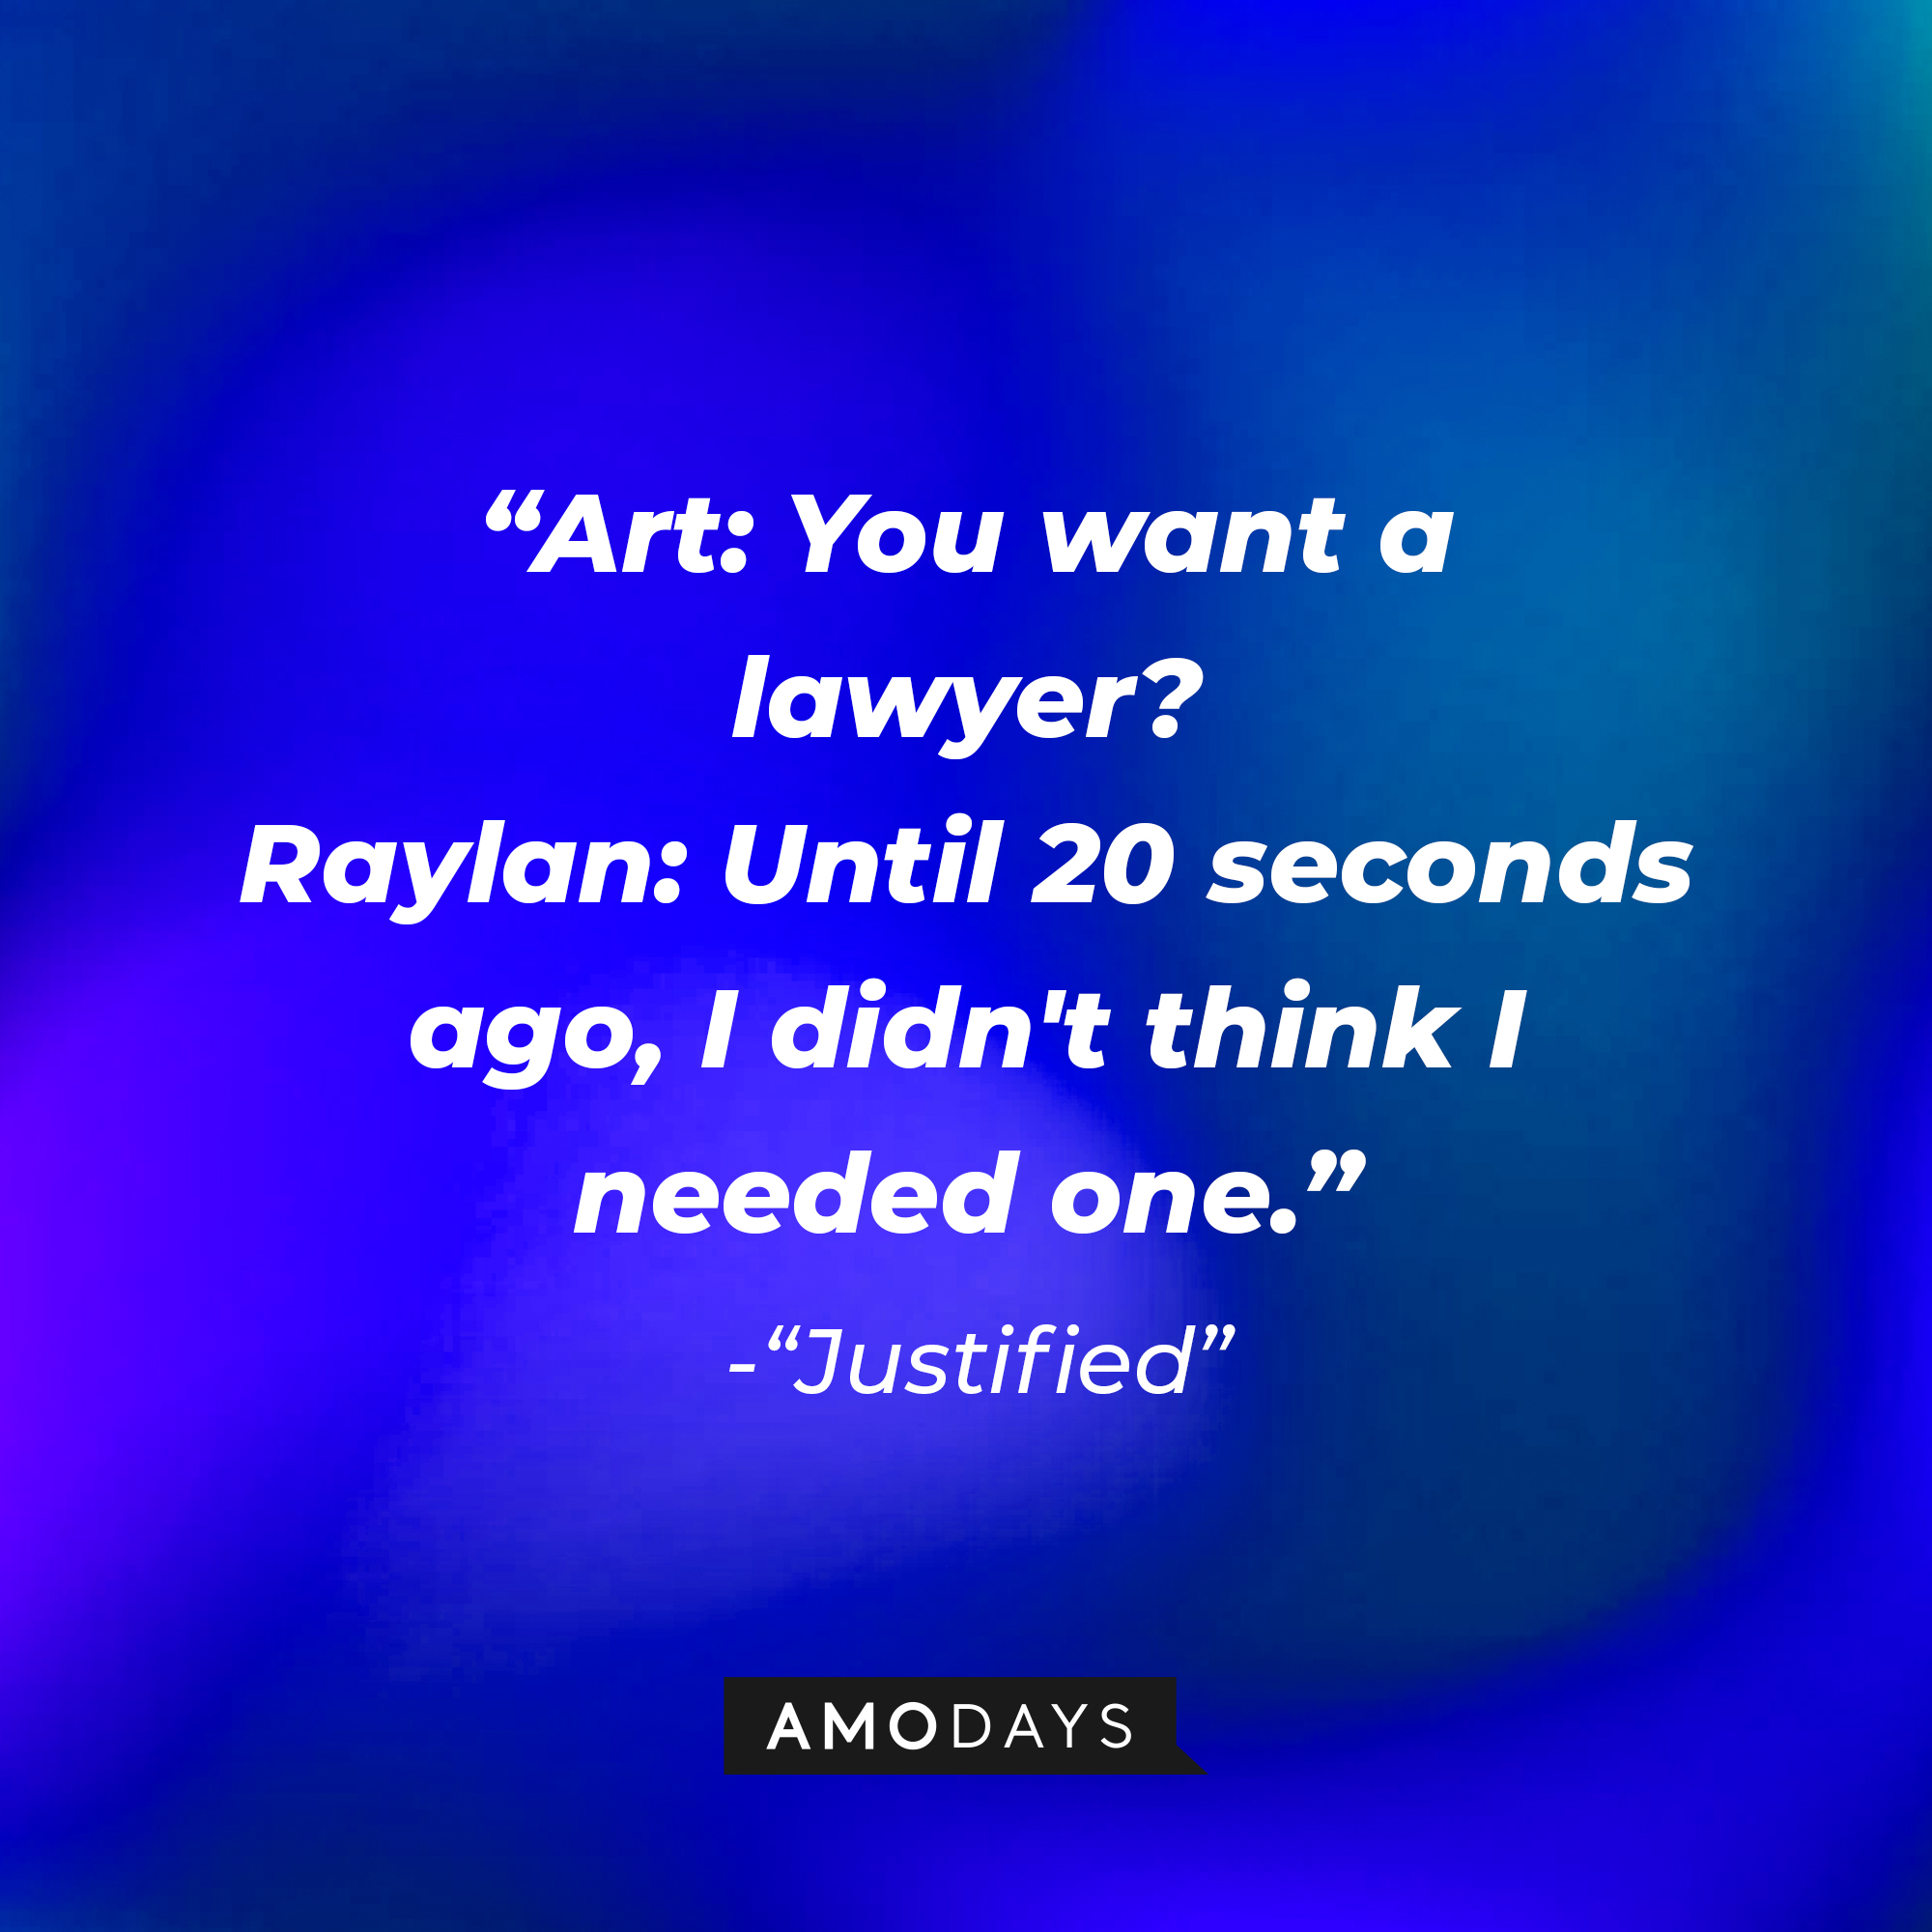 Quote from “Justified”: “Art: You want a lawyer? Raylan: Until 20 seconds ago, I didn't think I needed one.” | Source: AmoDays